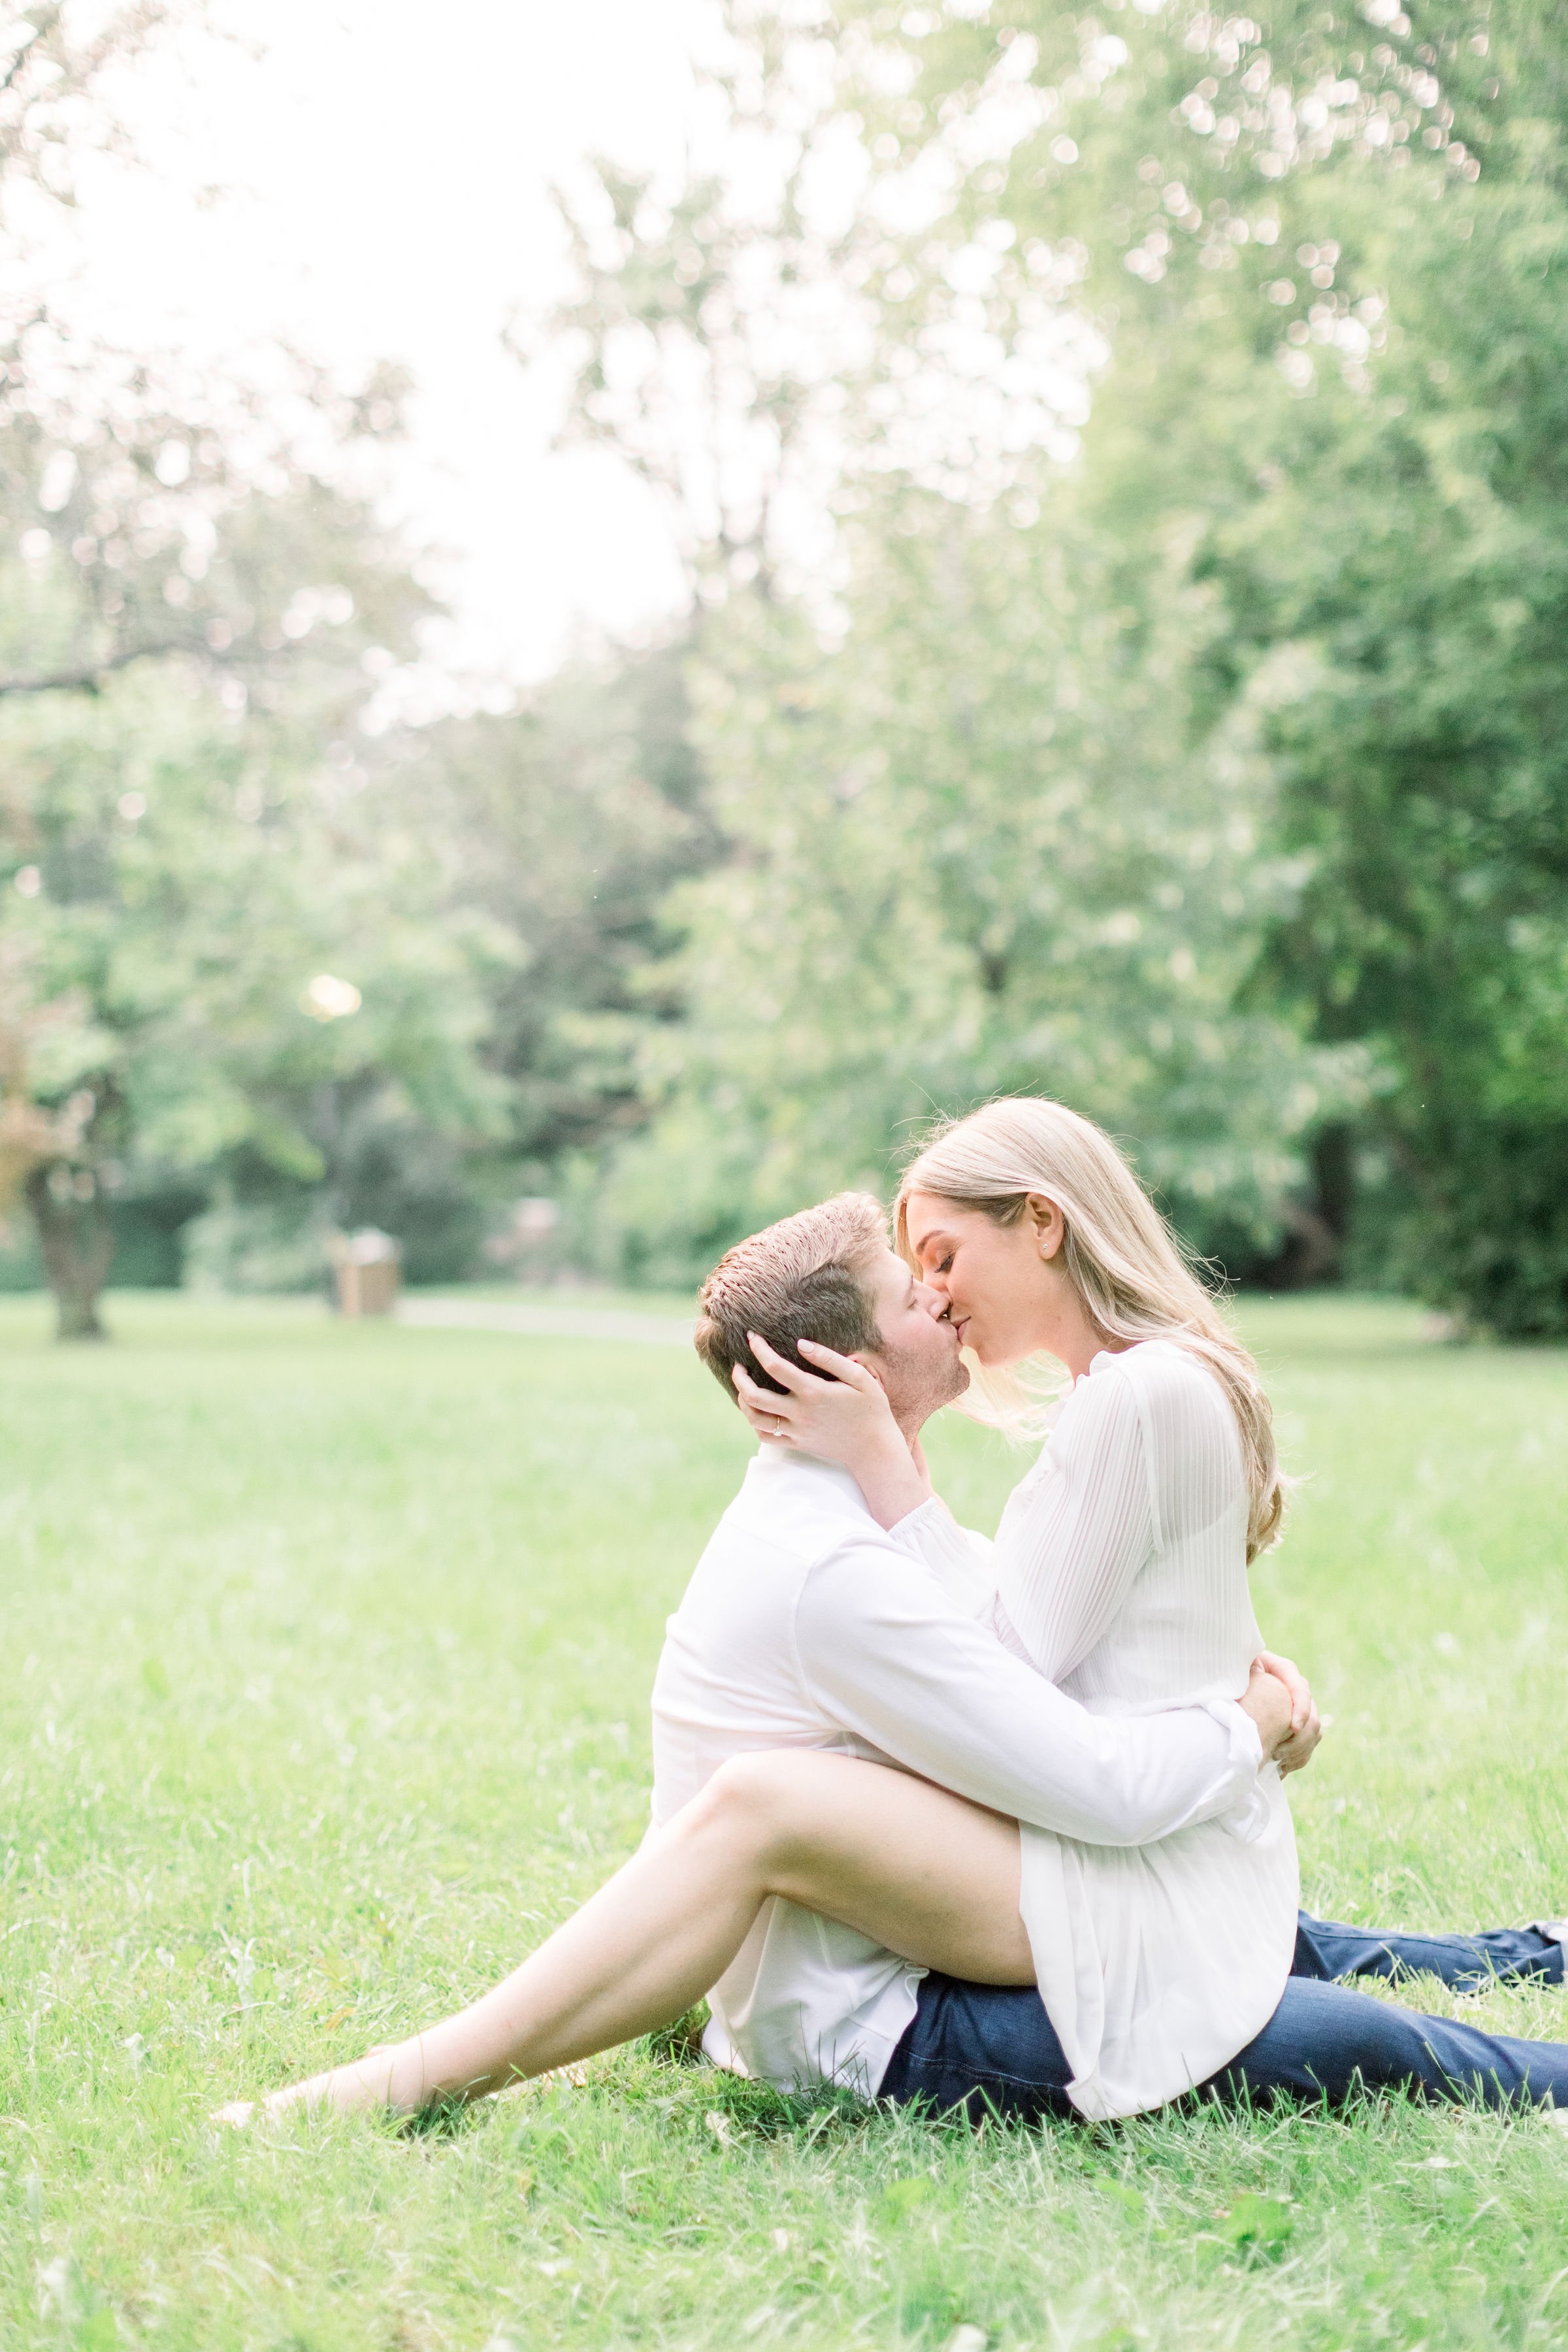  Sitting on a mans lap a woman kisses him holding his head captured by Chelsea Mason Photography. sitting engaged portraits #Ottawaengagements #Ottawaweddingphotographers #engagementwithdogs #ChelseaMasonPhotography #ChelseaMasonEngagements  